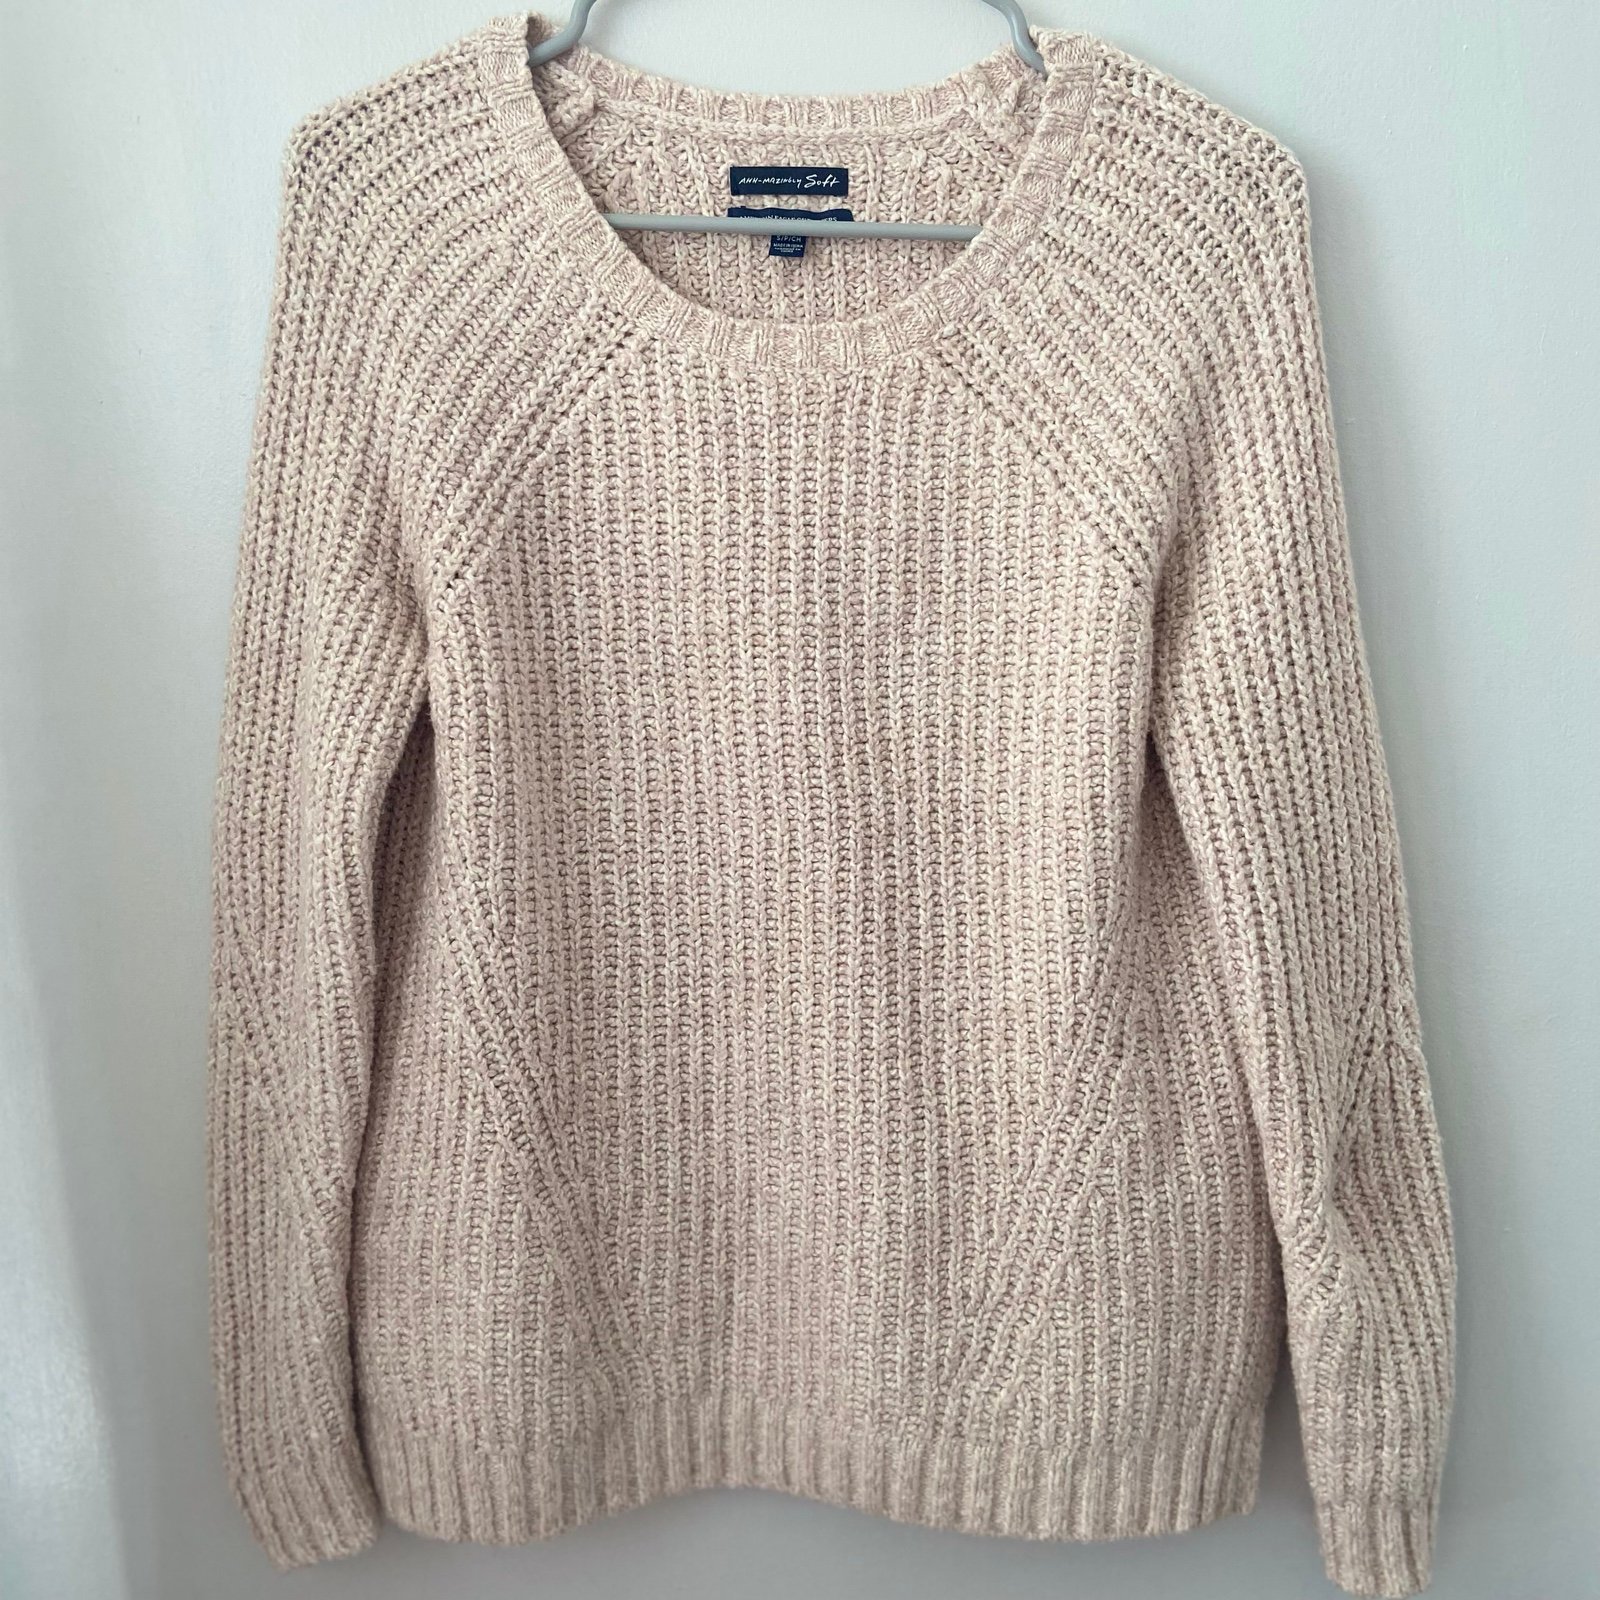 save up to 70% American eagle light pink knit oversized sweater size small GdTbacc3g Cool